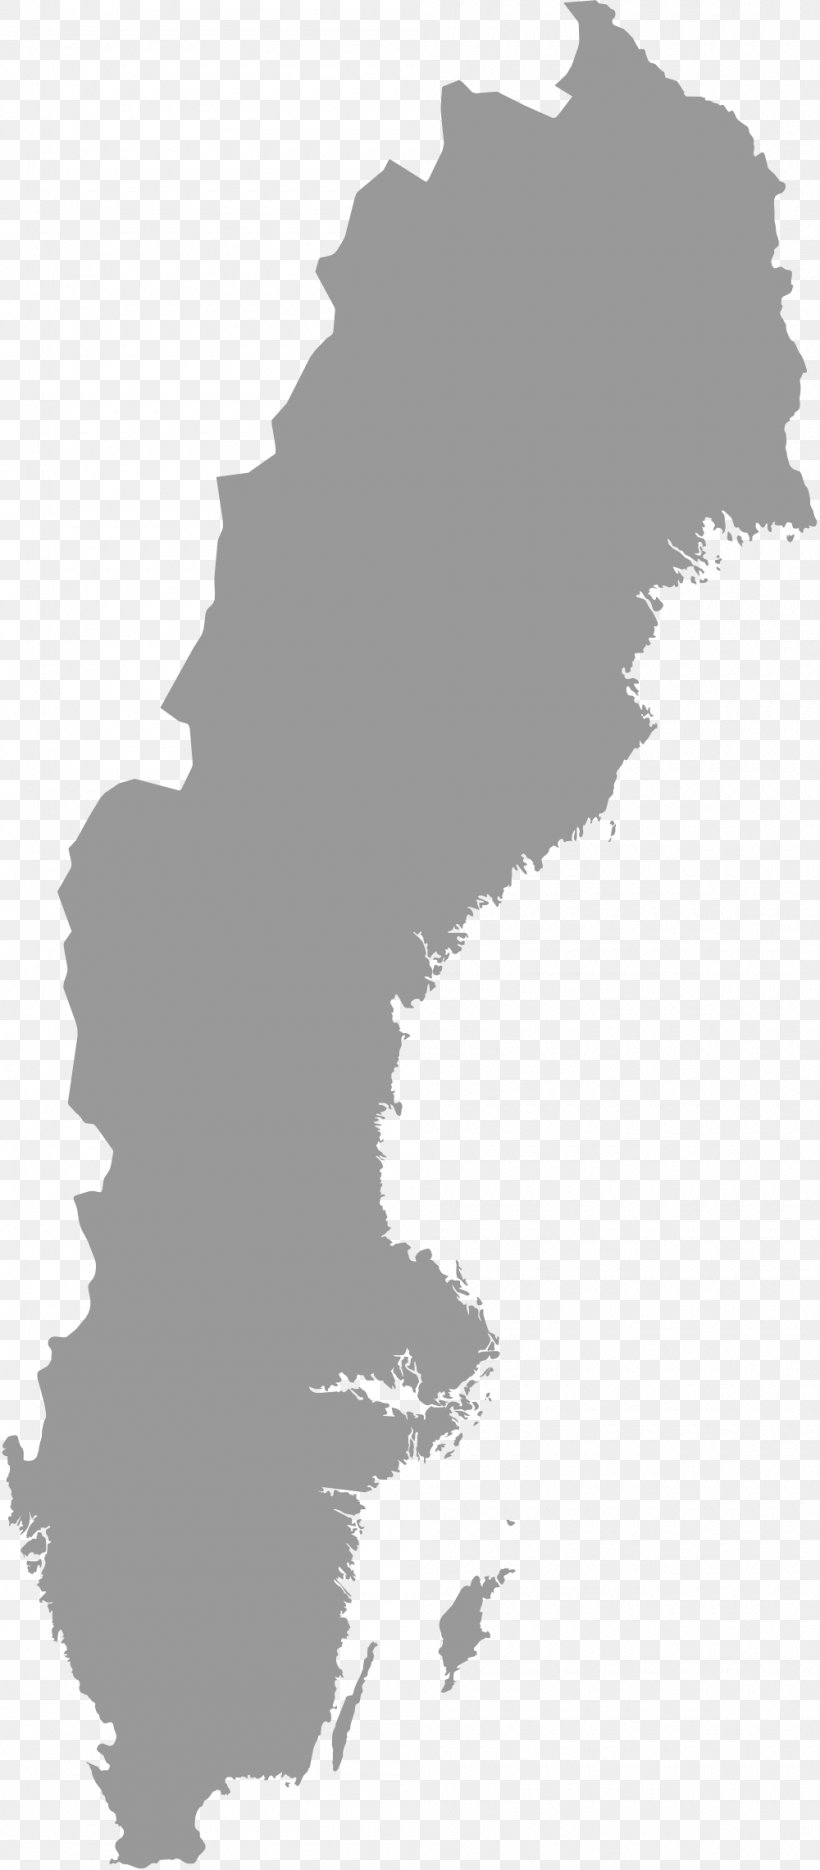 Sweden Vector Graphics Royalty-free Illustration Map, PNG, 1000x2281px, Sweden, Black, Black And White, Depositphotos, Drawing Download Free